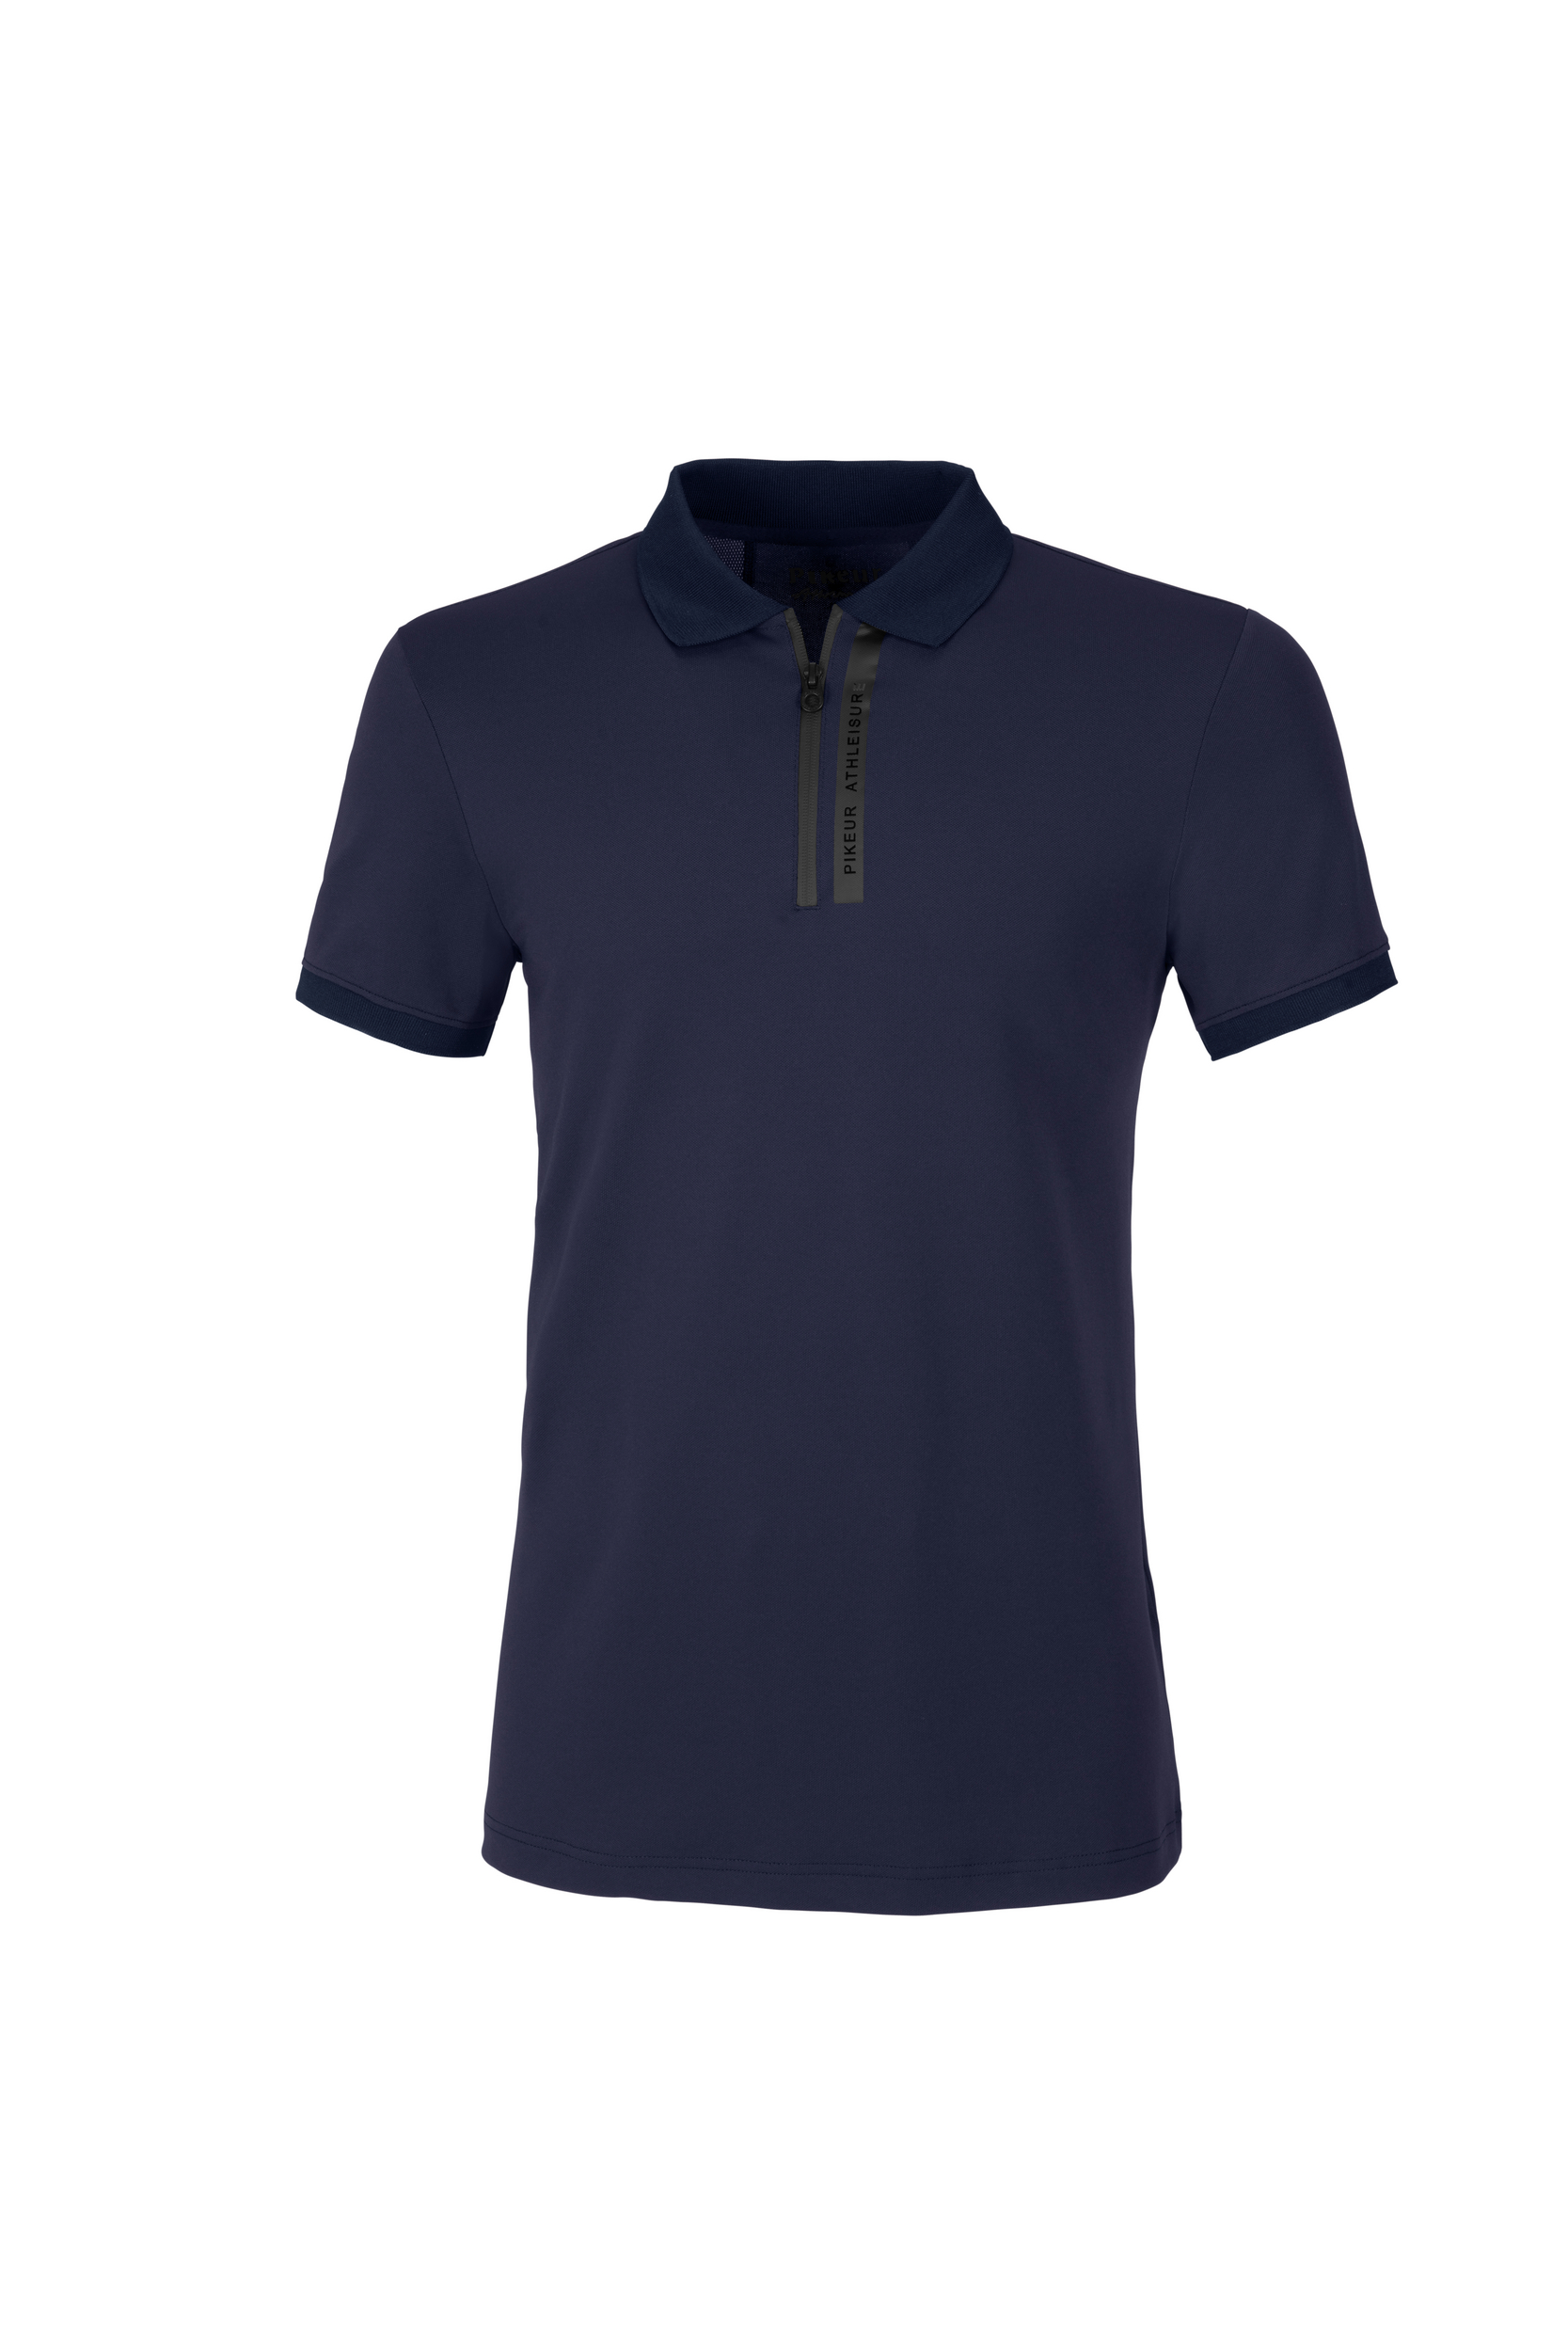 PIKEUR Herren Funktions Polo Shirt Ole - navy - L - 2